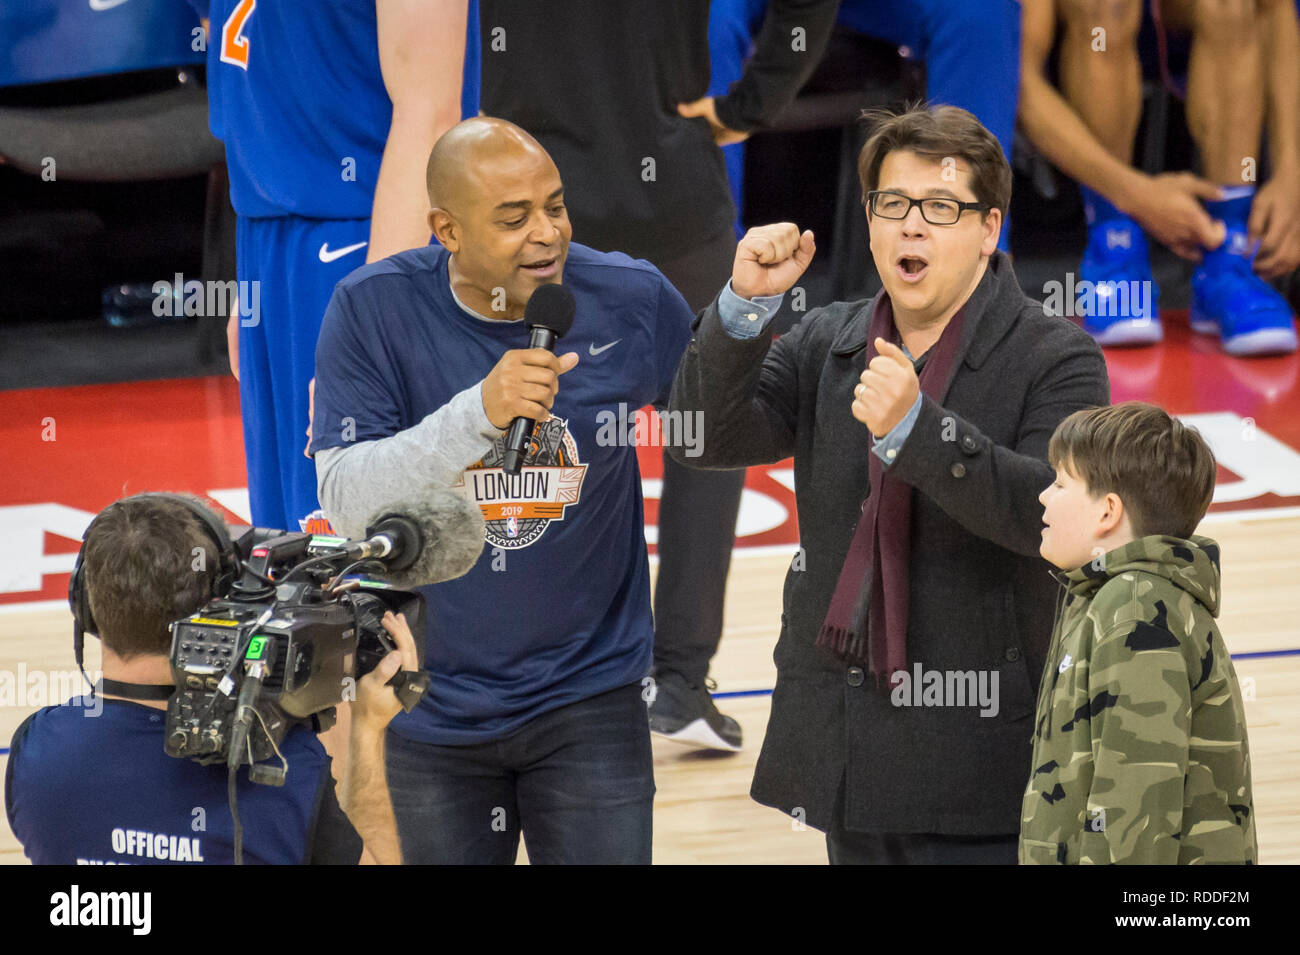 Londo , UK.  17 January 2019. Michael McIntyre (2R) and his son Ossie are interviewed during an NBA basketball game, NBA London 2019, between Washington Wizards and New York Knicks at the O2 Arena.  Final score: Wizards 101 Knicks 100.  Credit: Stephen Chung / Alamy Live News Stock Photo